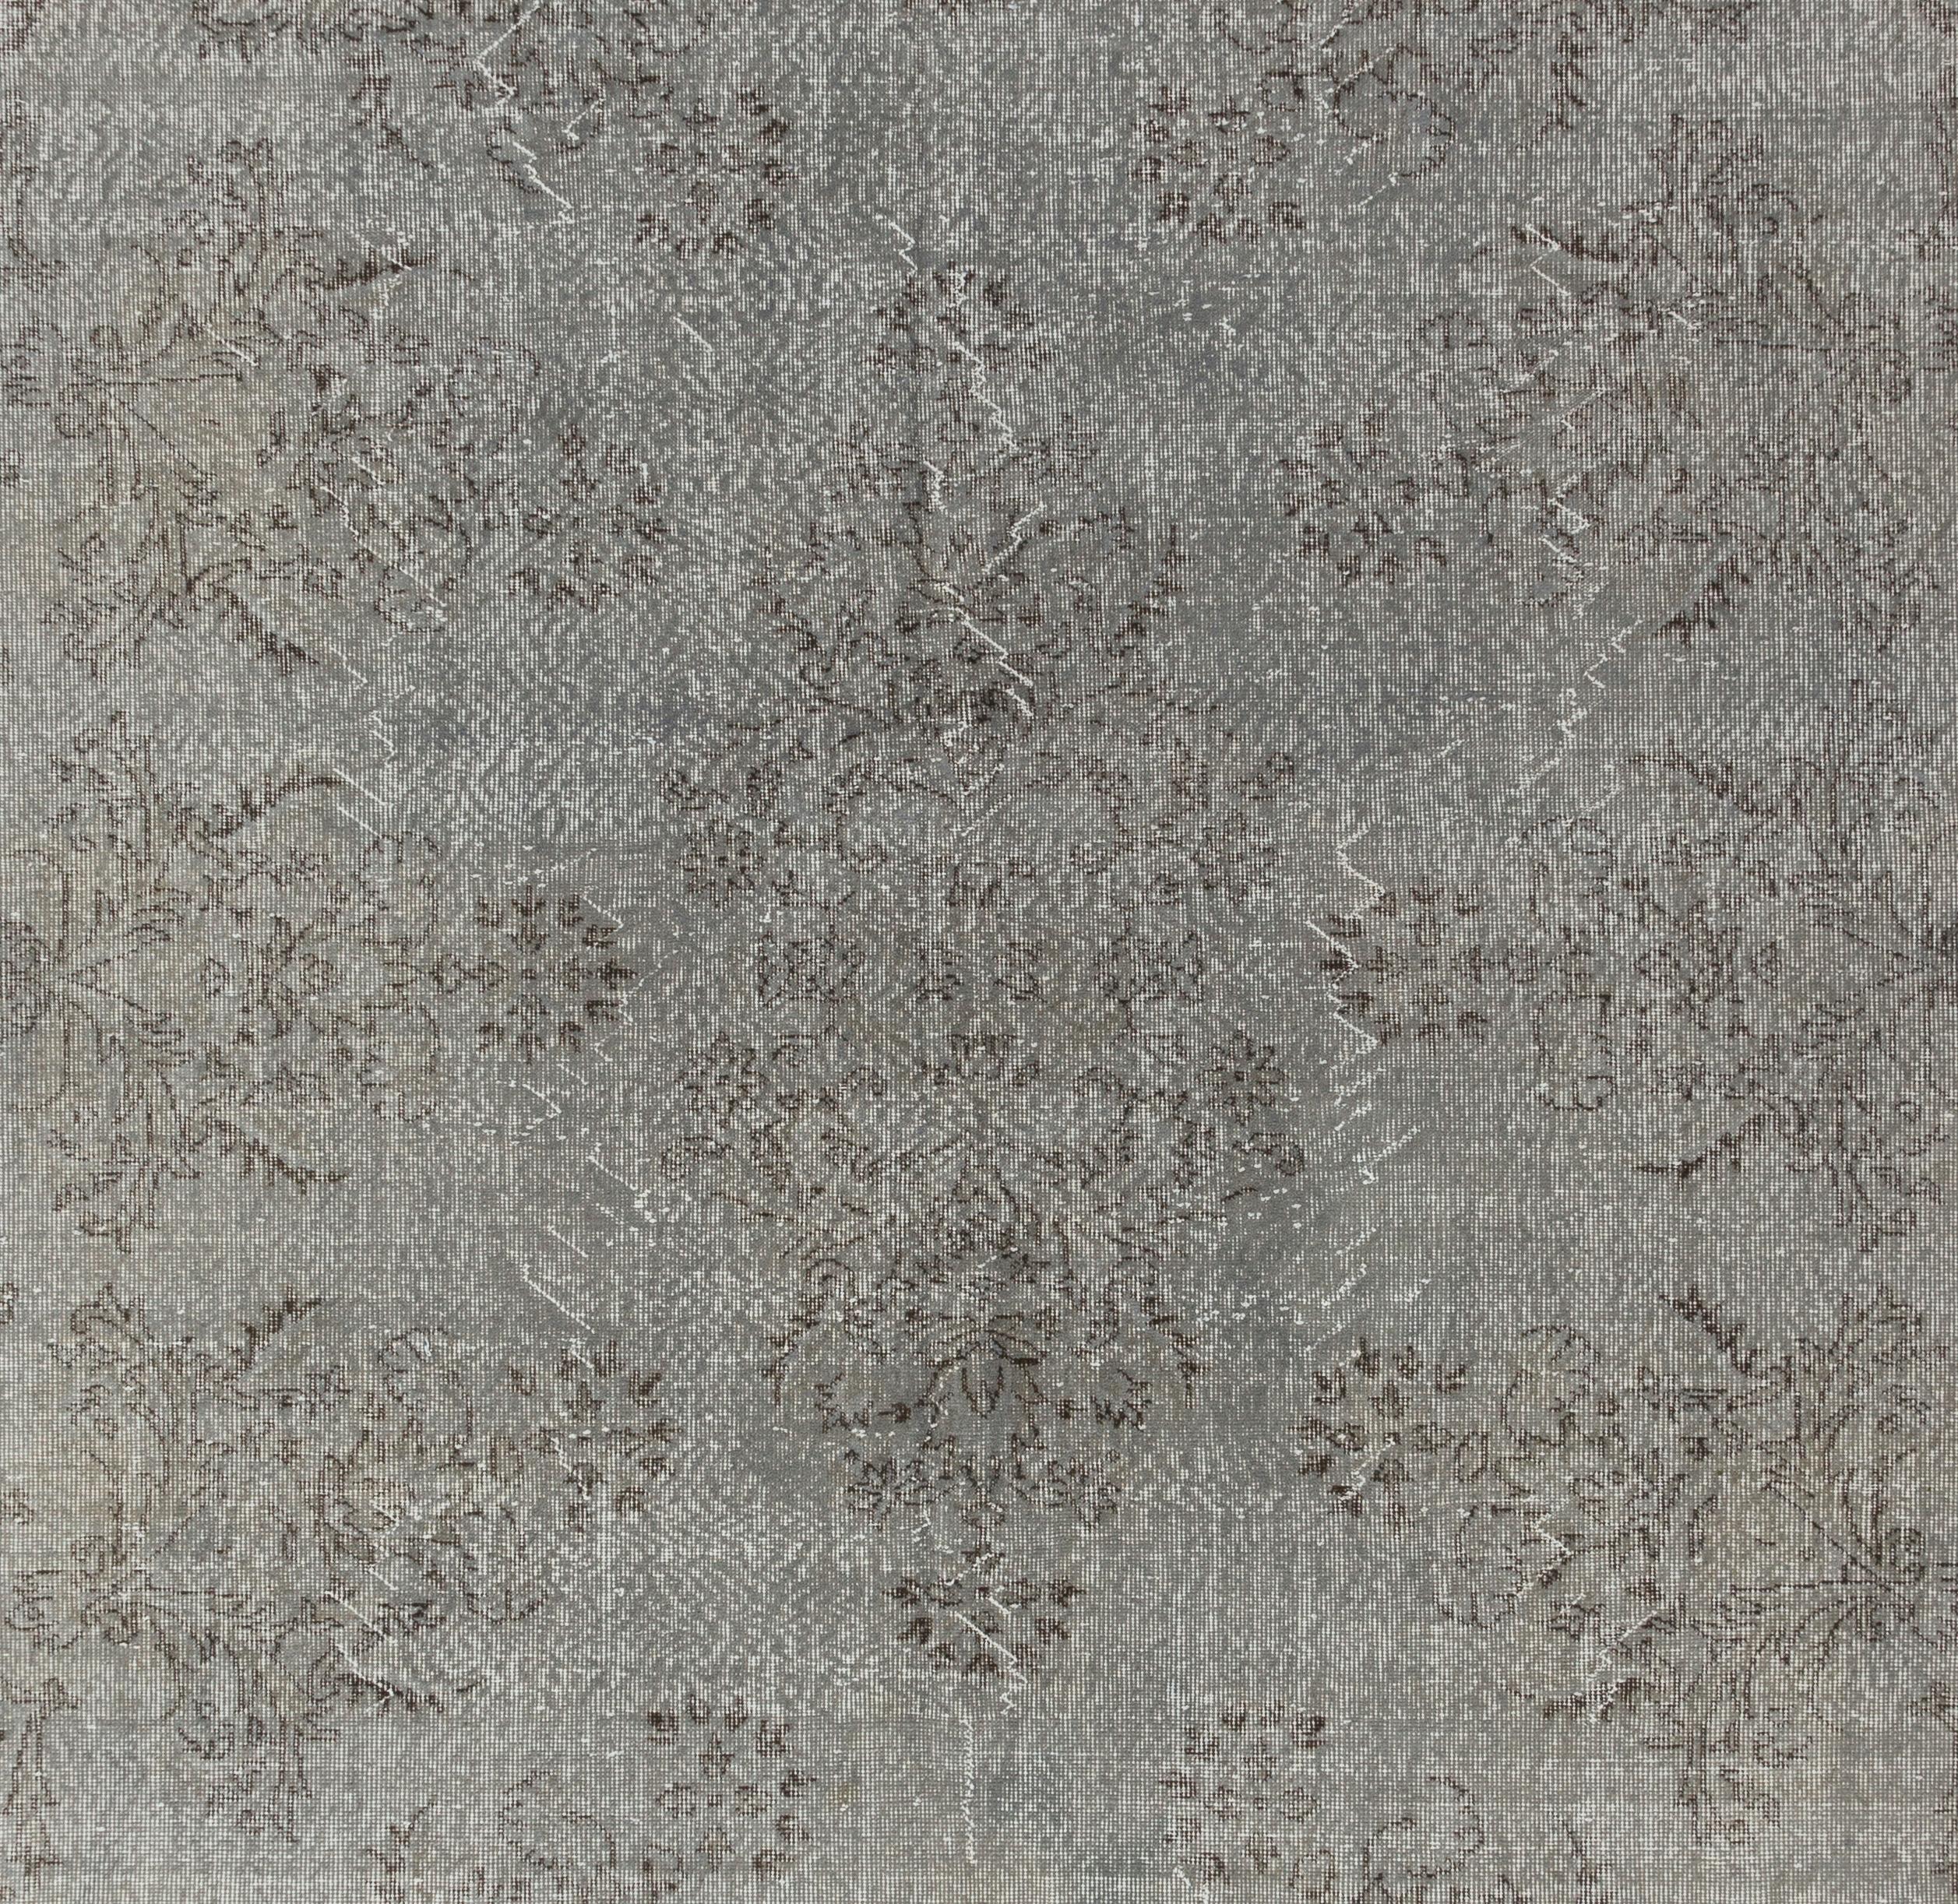 Turkish 7.6x11.4 Ft Vintage Oriental Rug ReDyed in Gray Color for Contemporary Interiors For Sale